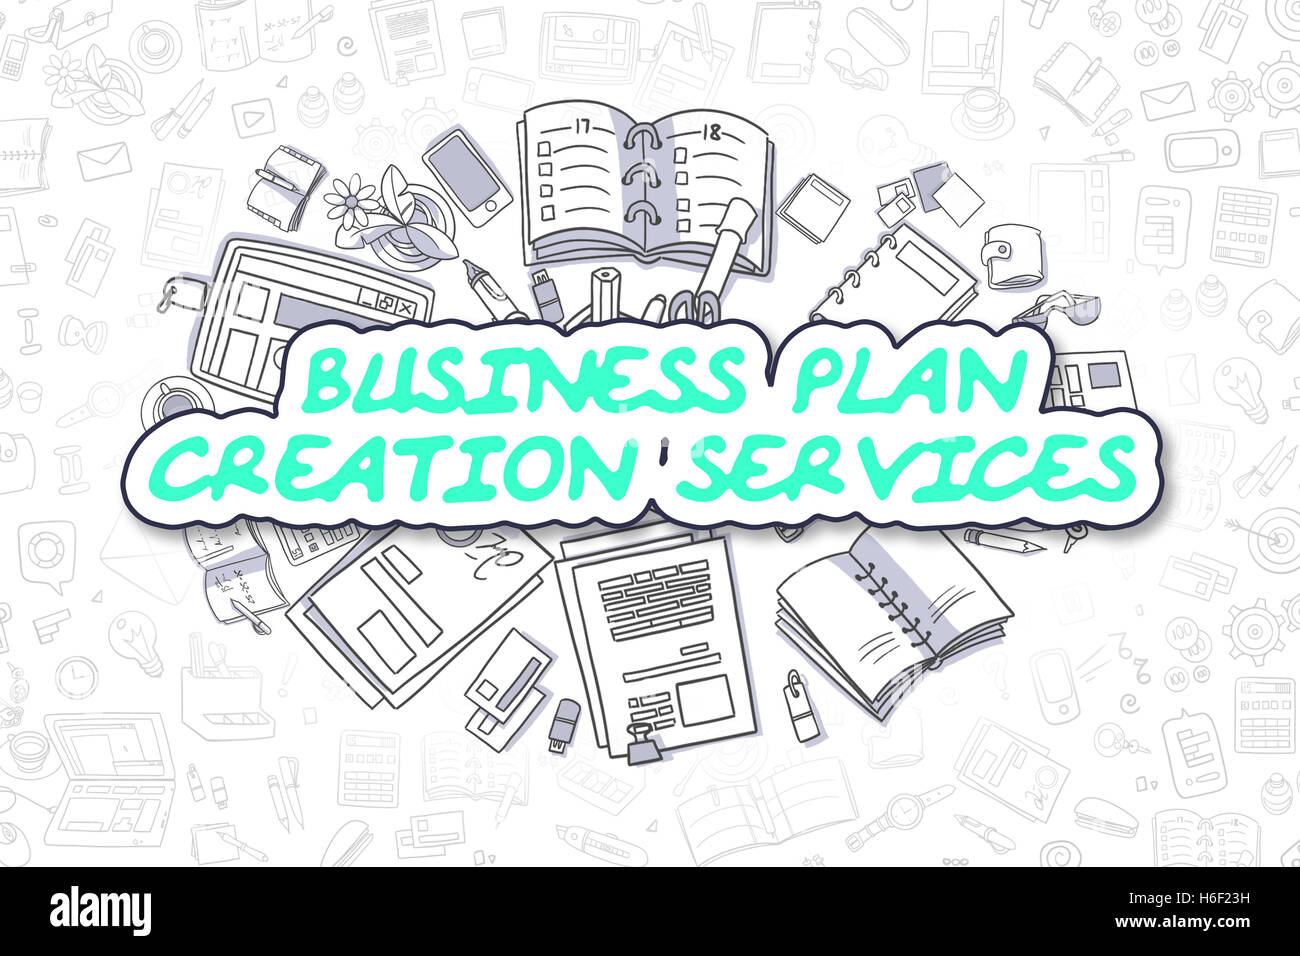 Business Plan Creation Services - Business Concept. Stock Photo